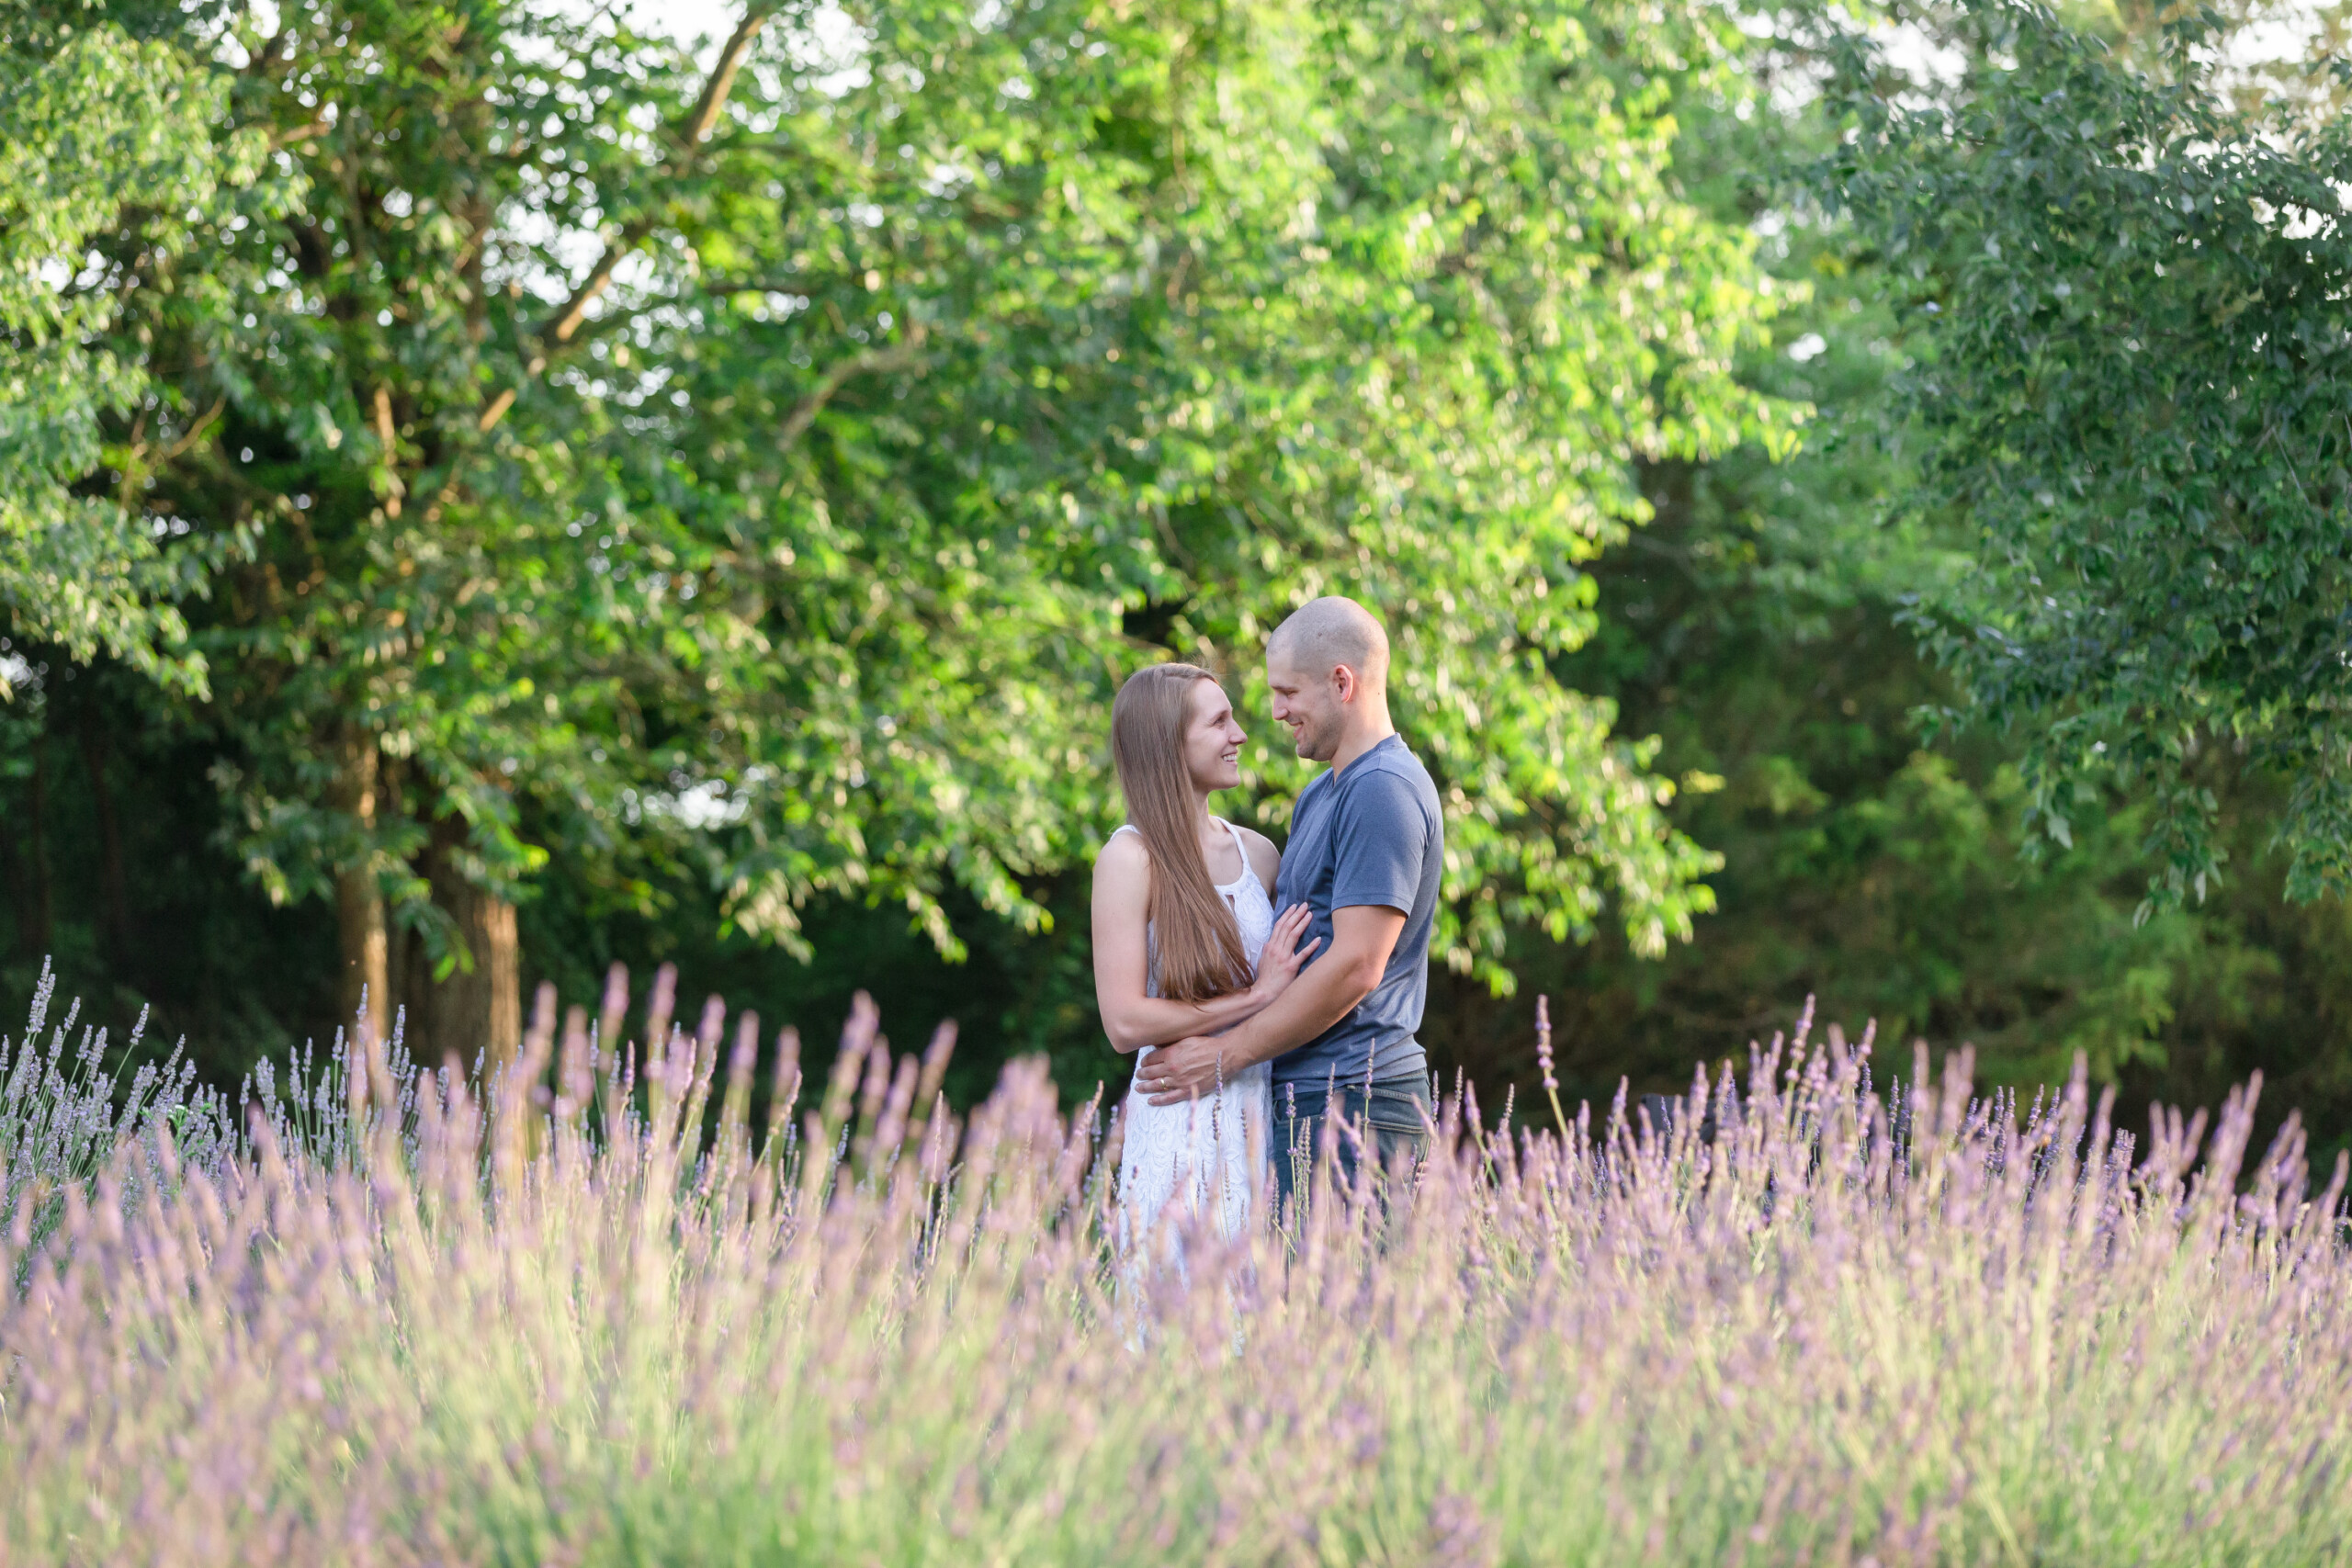 Menkveld Farm: Offering Lavender Bouquets and Wedding Gifts